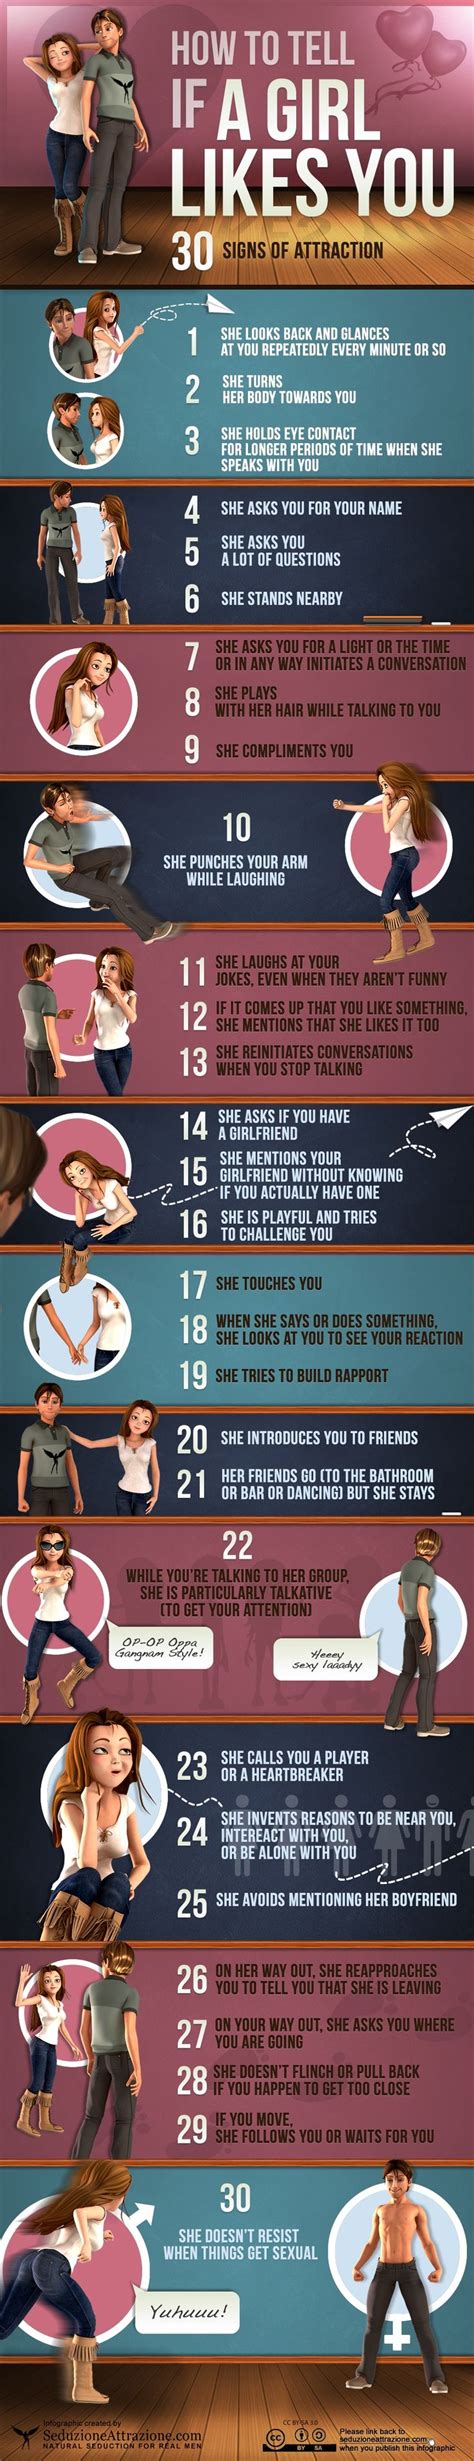 Peacocking similar to how a man flexes his muscles and improves his posture when he's around someone he is attracted to, a woman will try to. 30 Signs Of Attraction If A Girl Likes You [Infographic ...